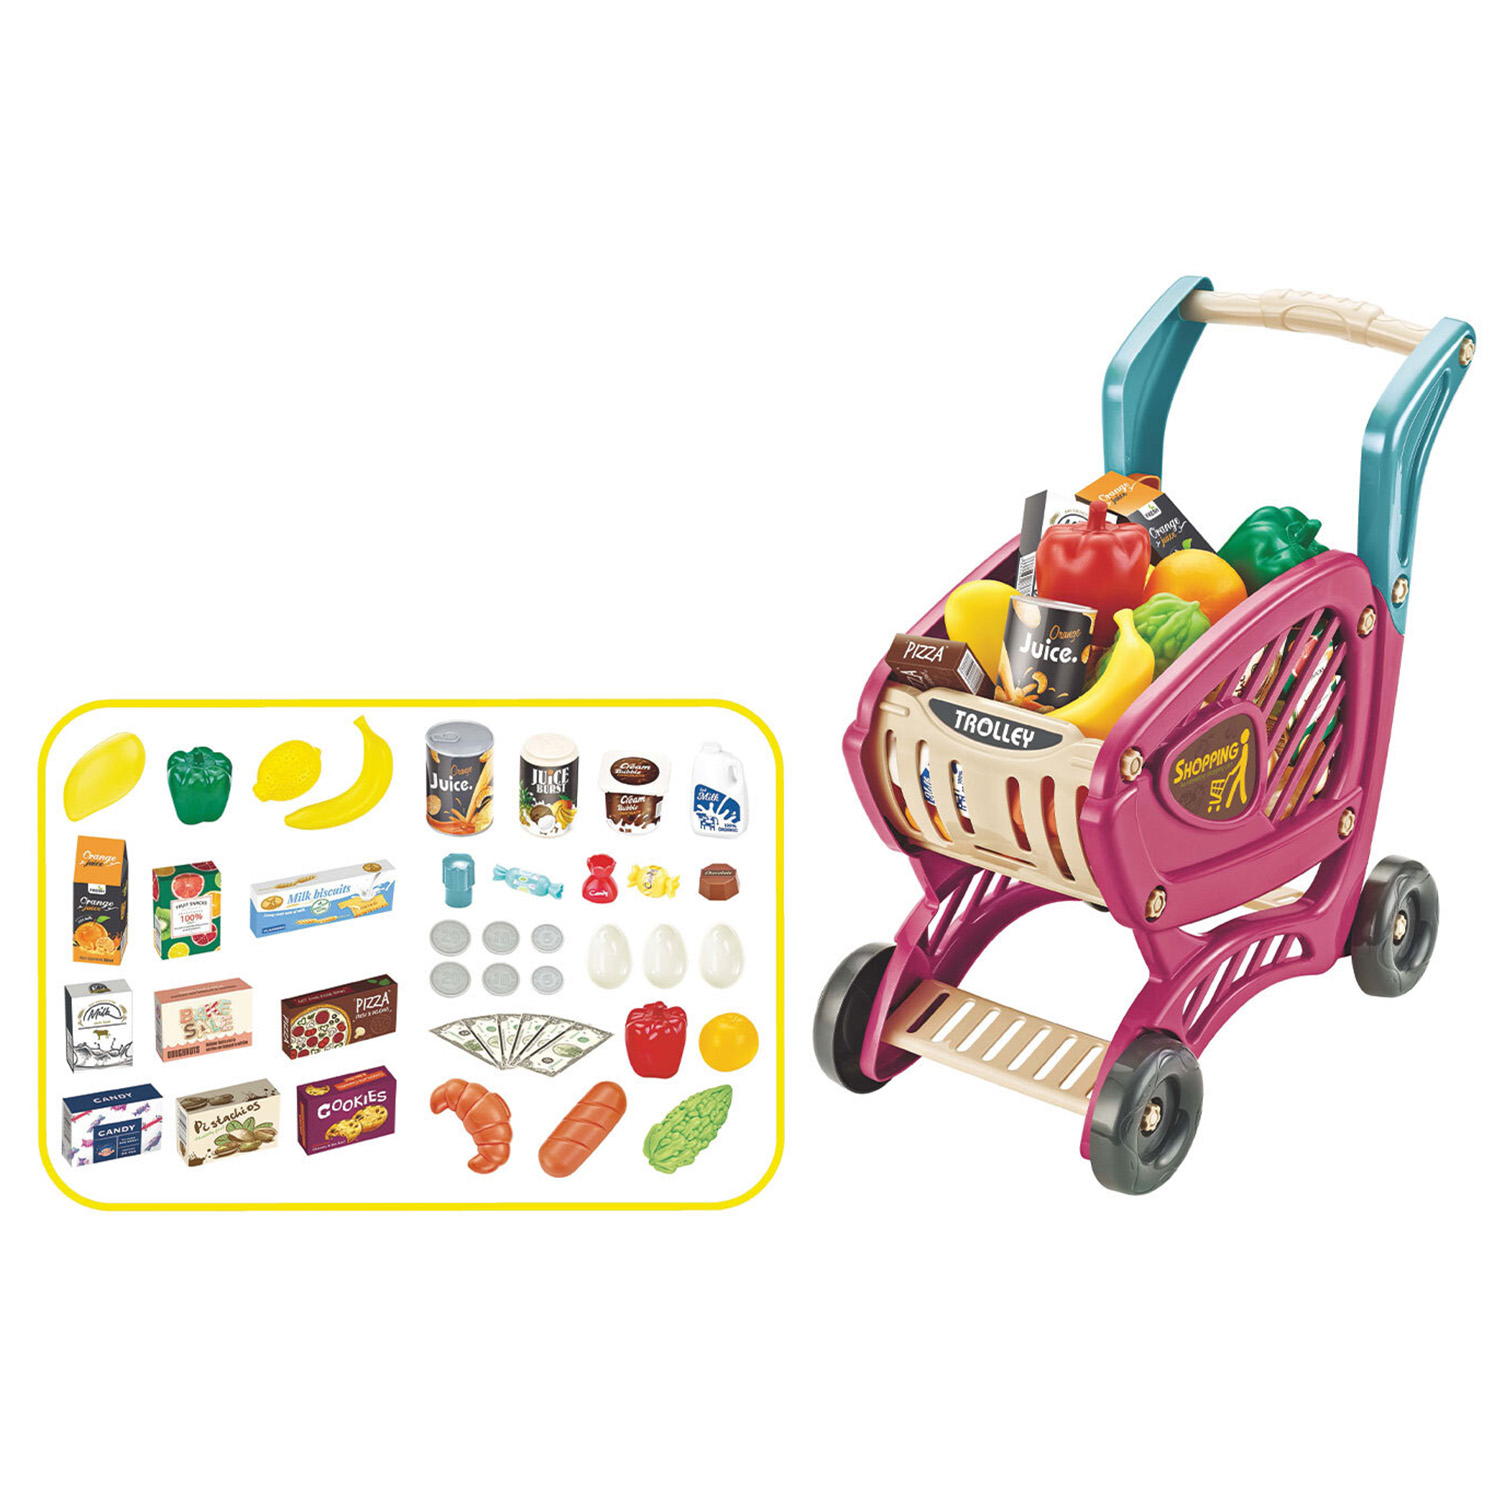 Imaginate Shopping Trolley and Accessories Kids 48 Piece Playset Image 1